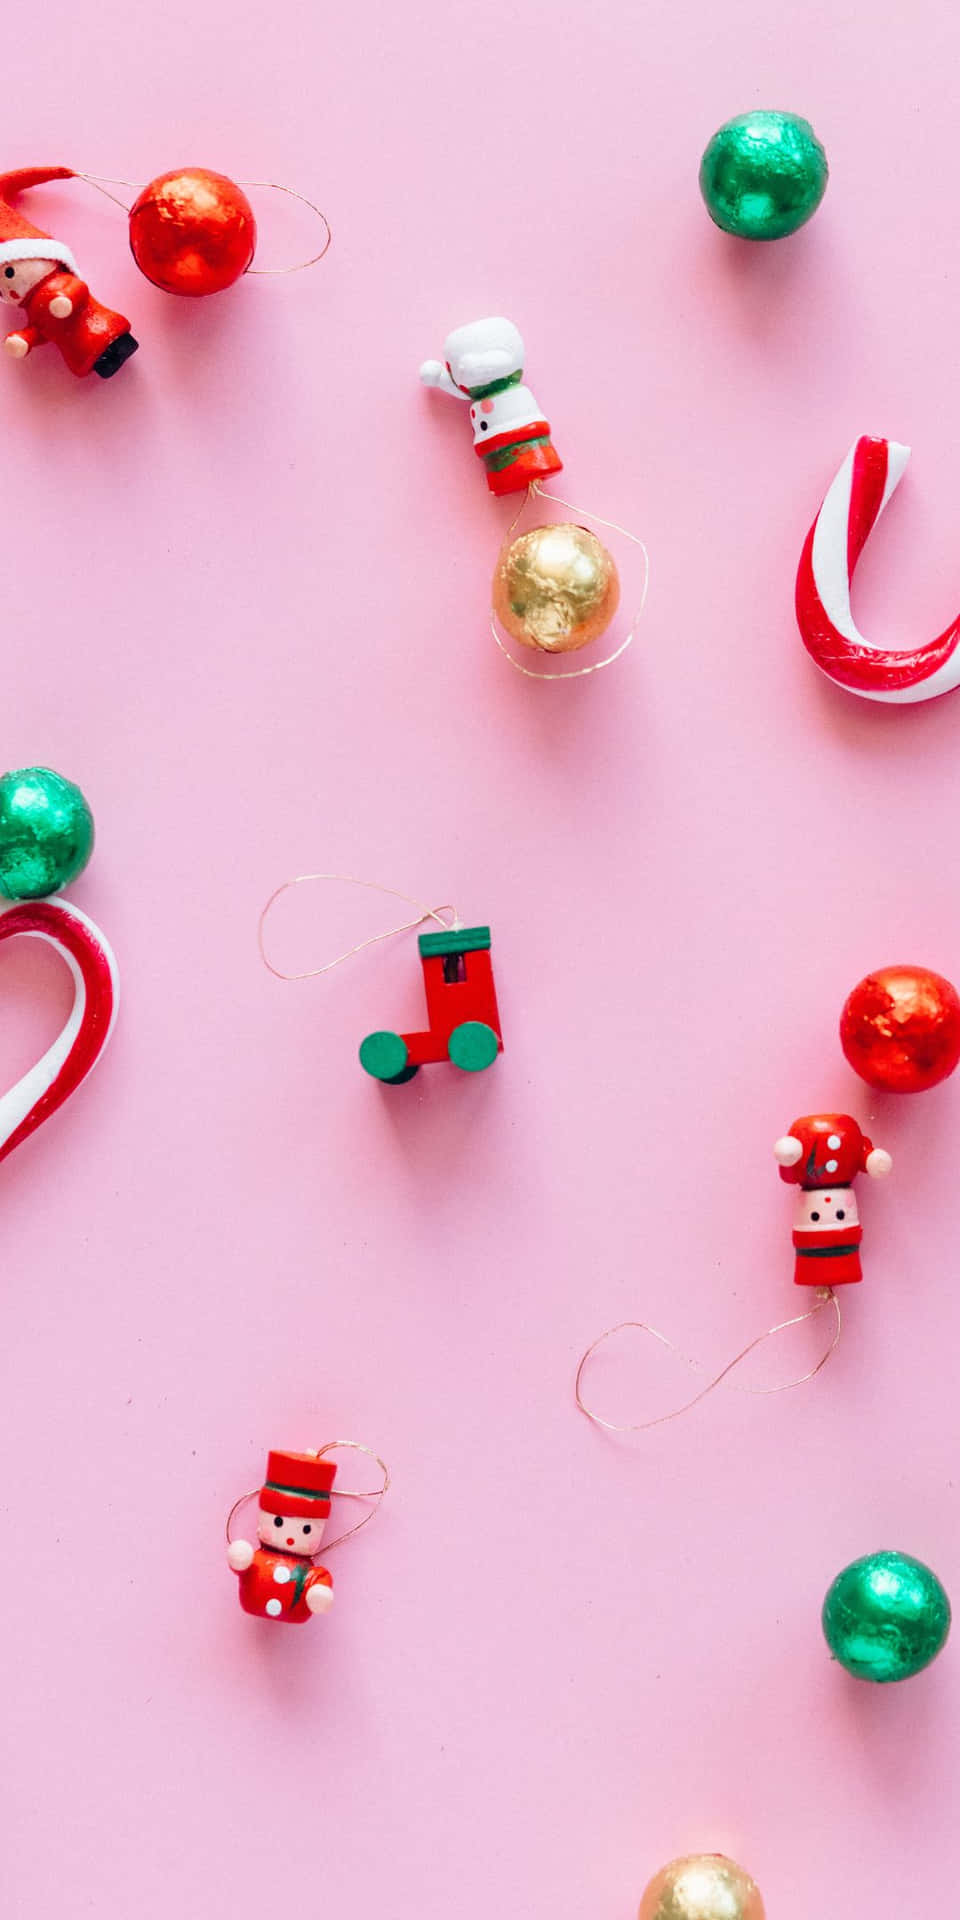 Get into the holiday spirit with a festive pink Christmas background